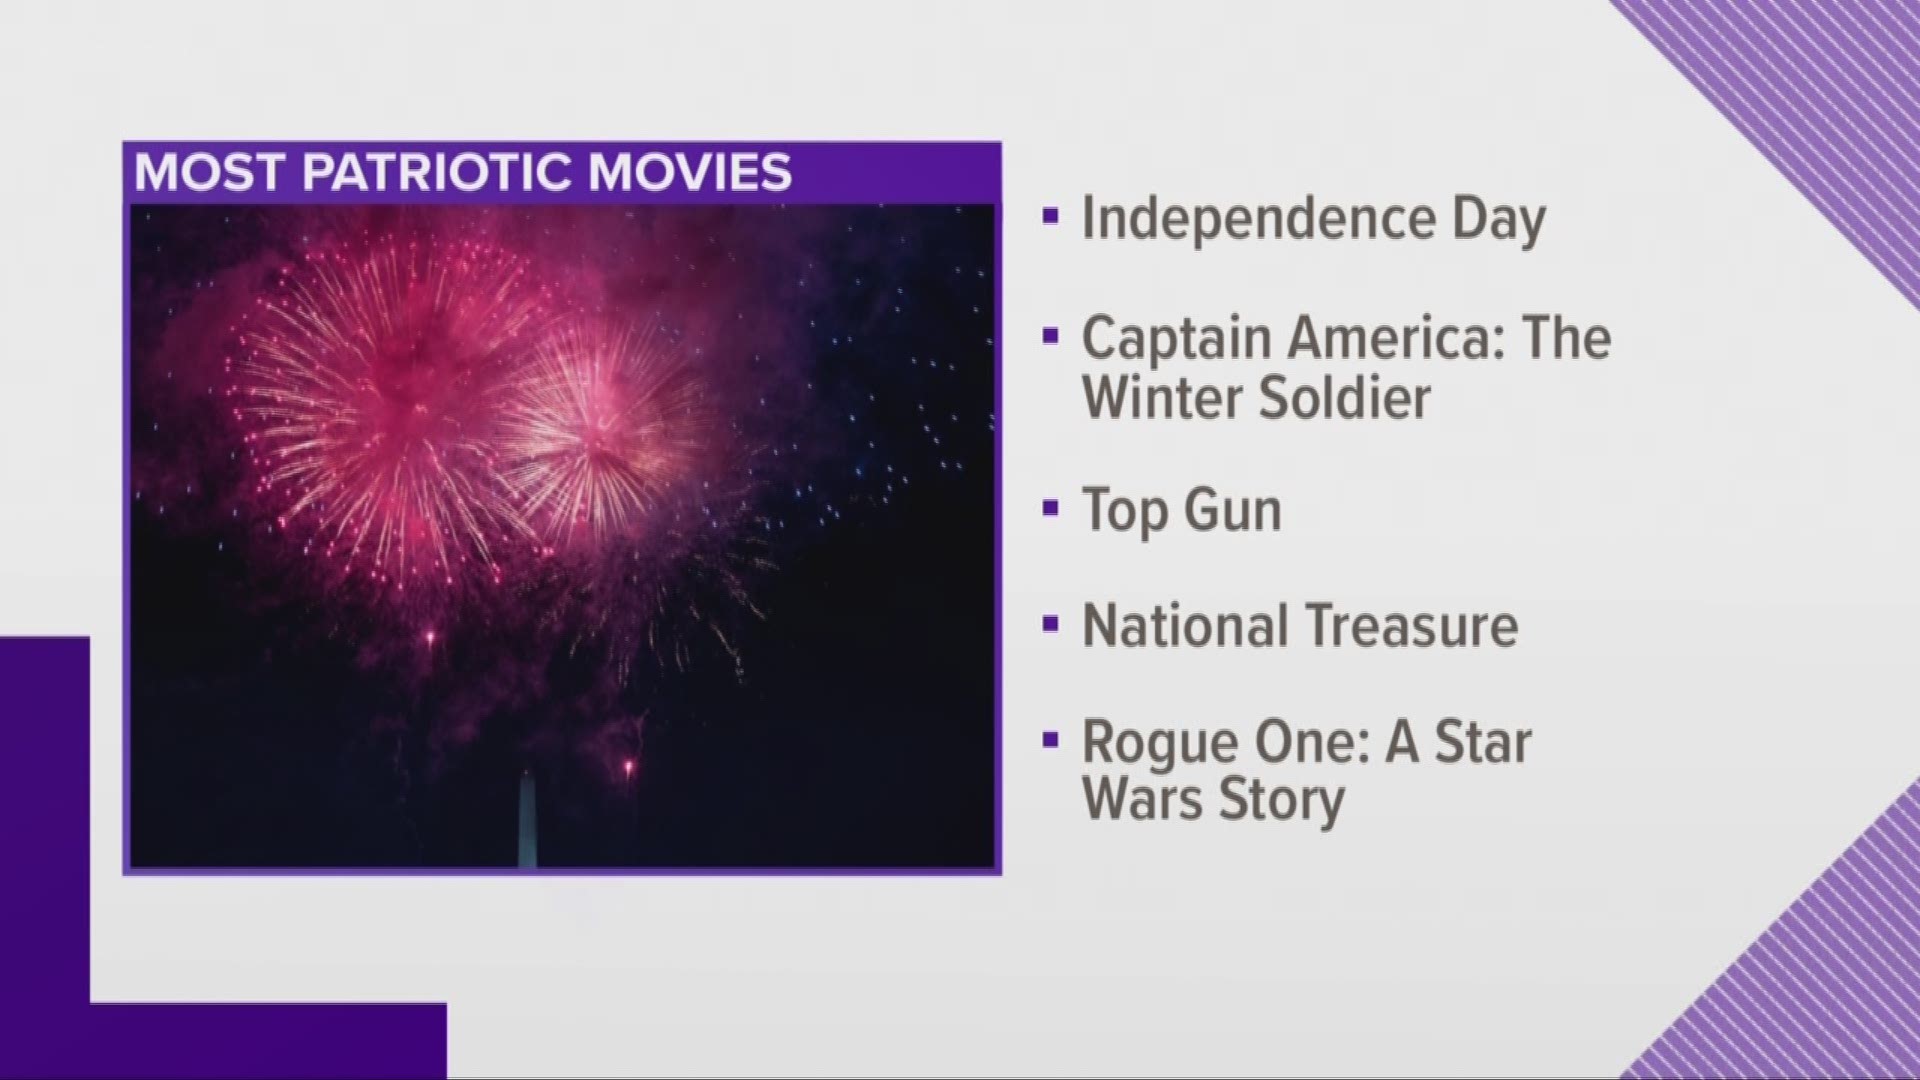 The top 5 patriotic movies were ranked in a new list.